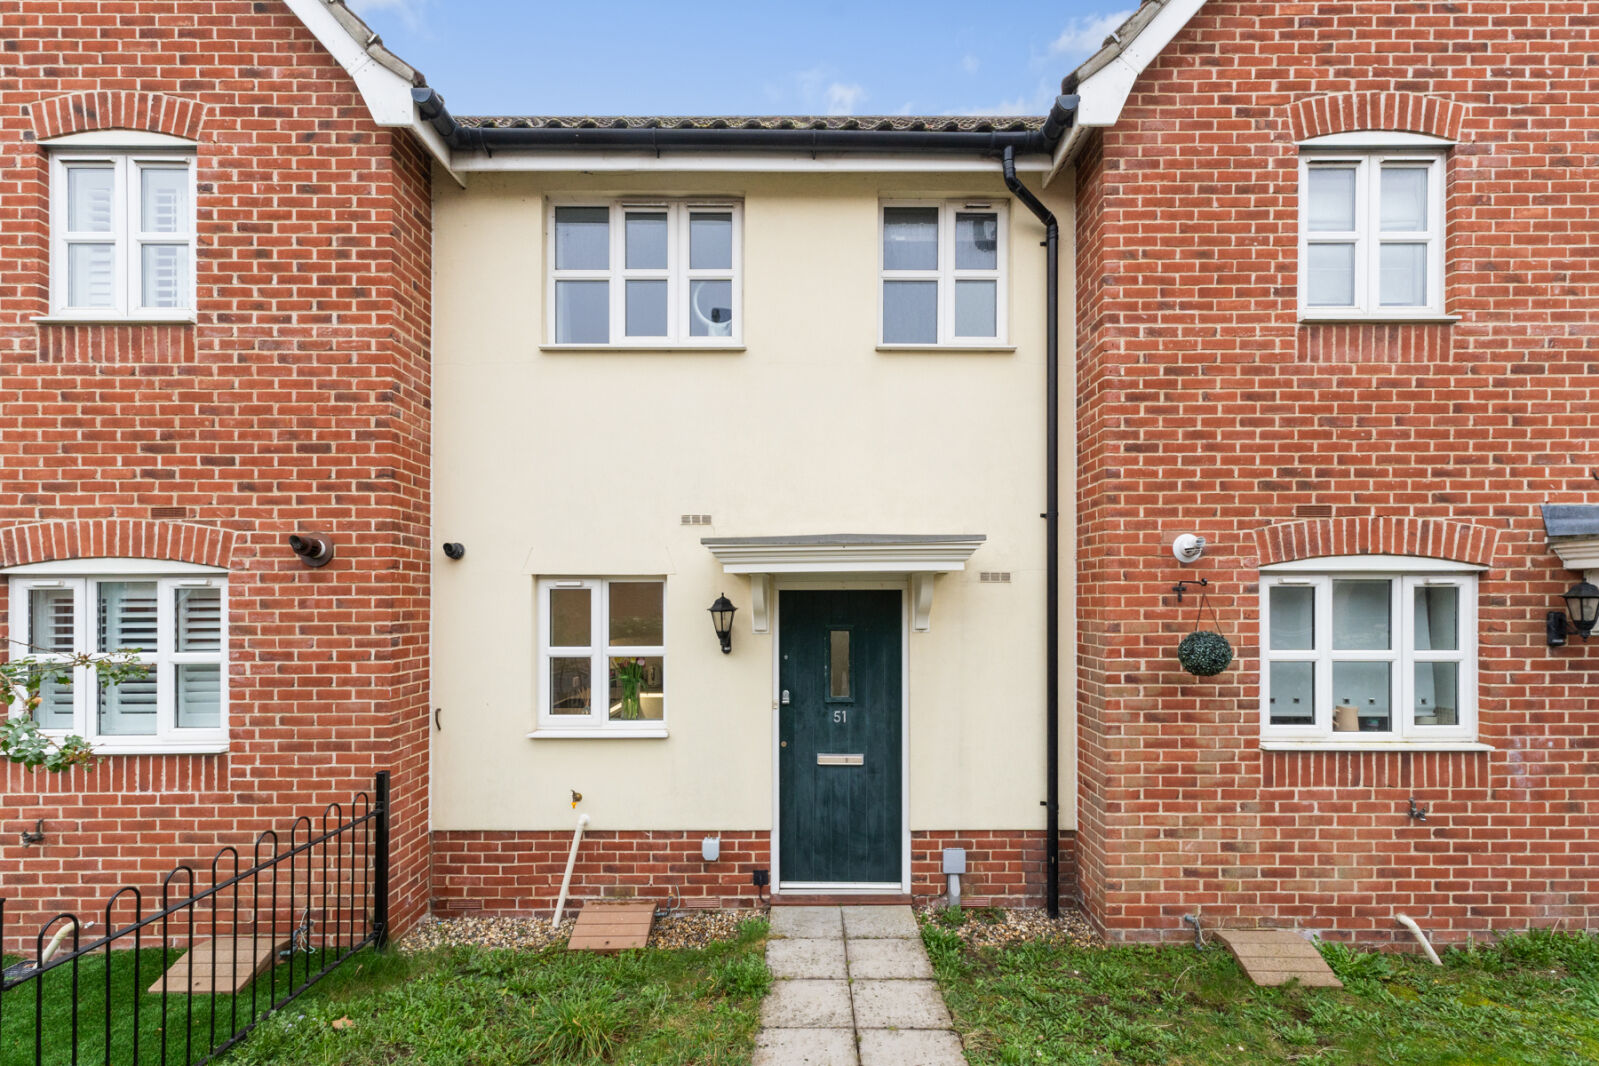 2 bedroom mid terraced house for sale Ranulf Road, Flitch Green, CM6, main image